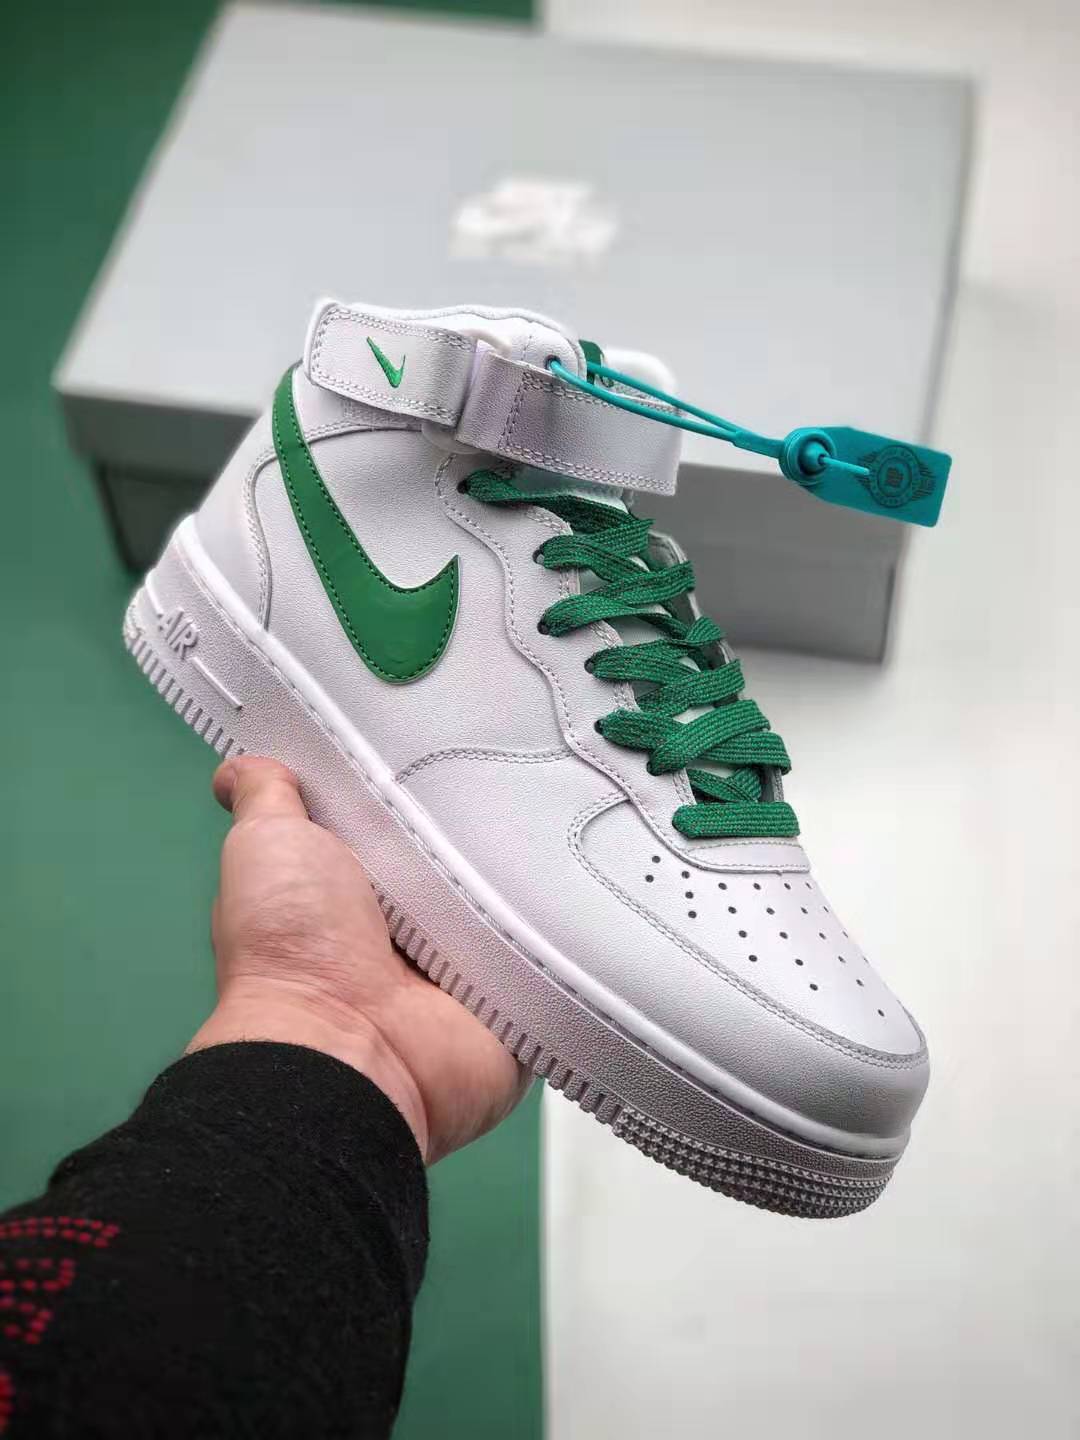 Nike Air Force 1 Mid 07 White Green - 366731-909 | Latest Release Air Force 1 Mid in Classic Colorway!